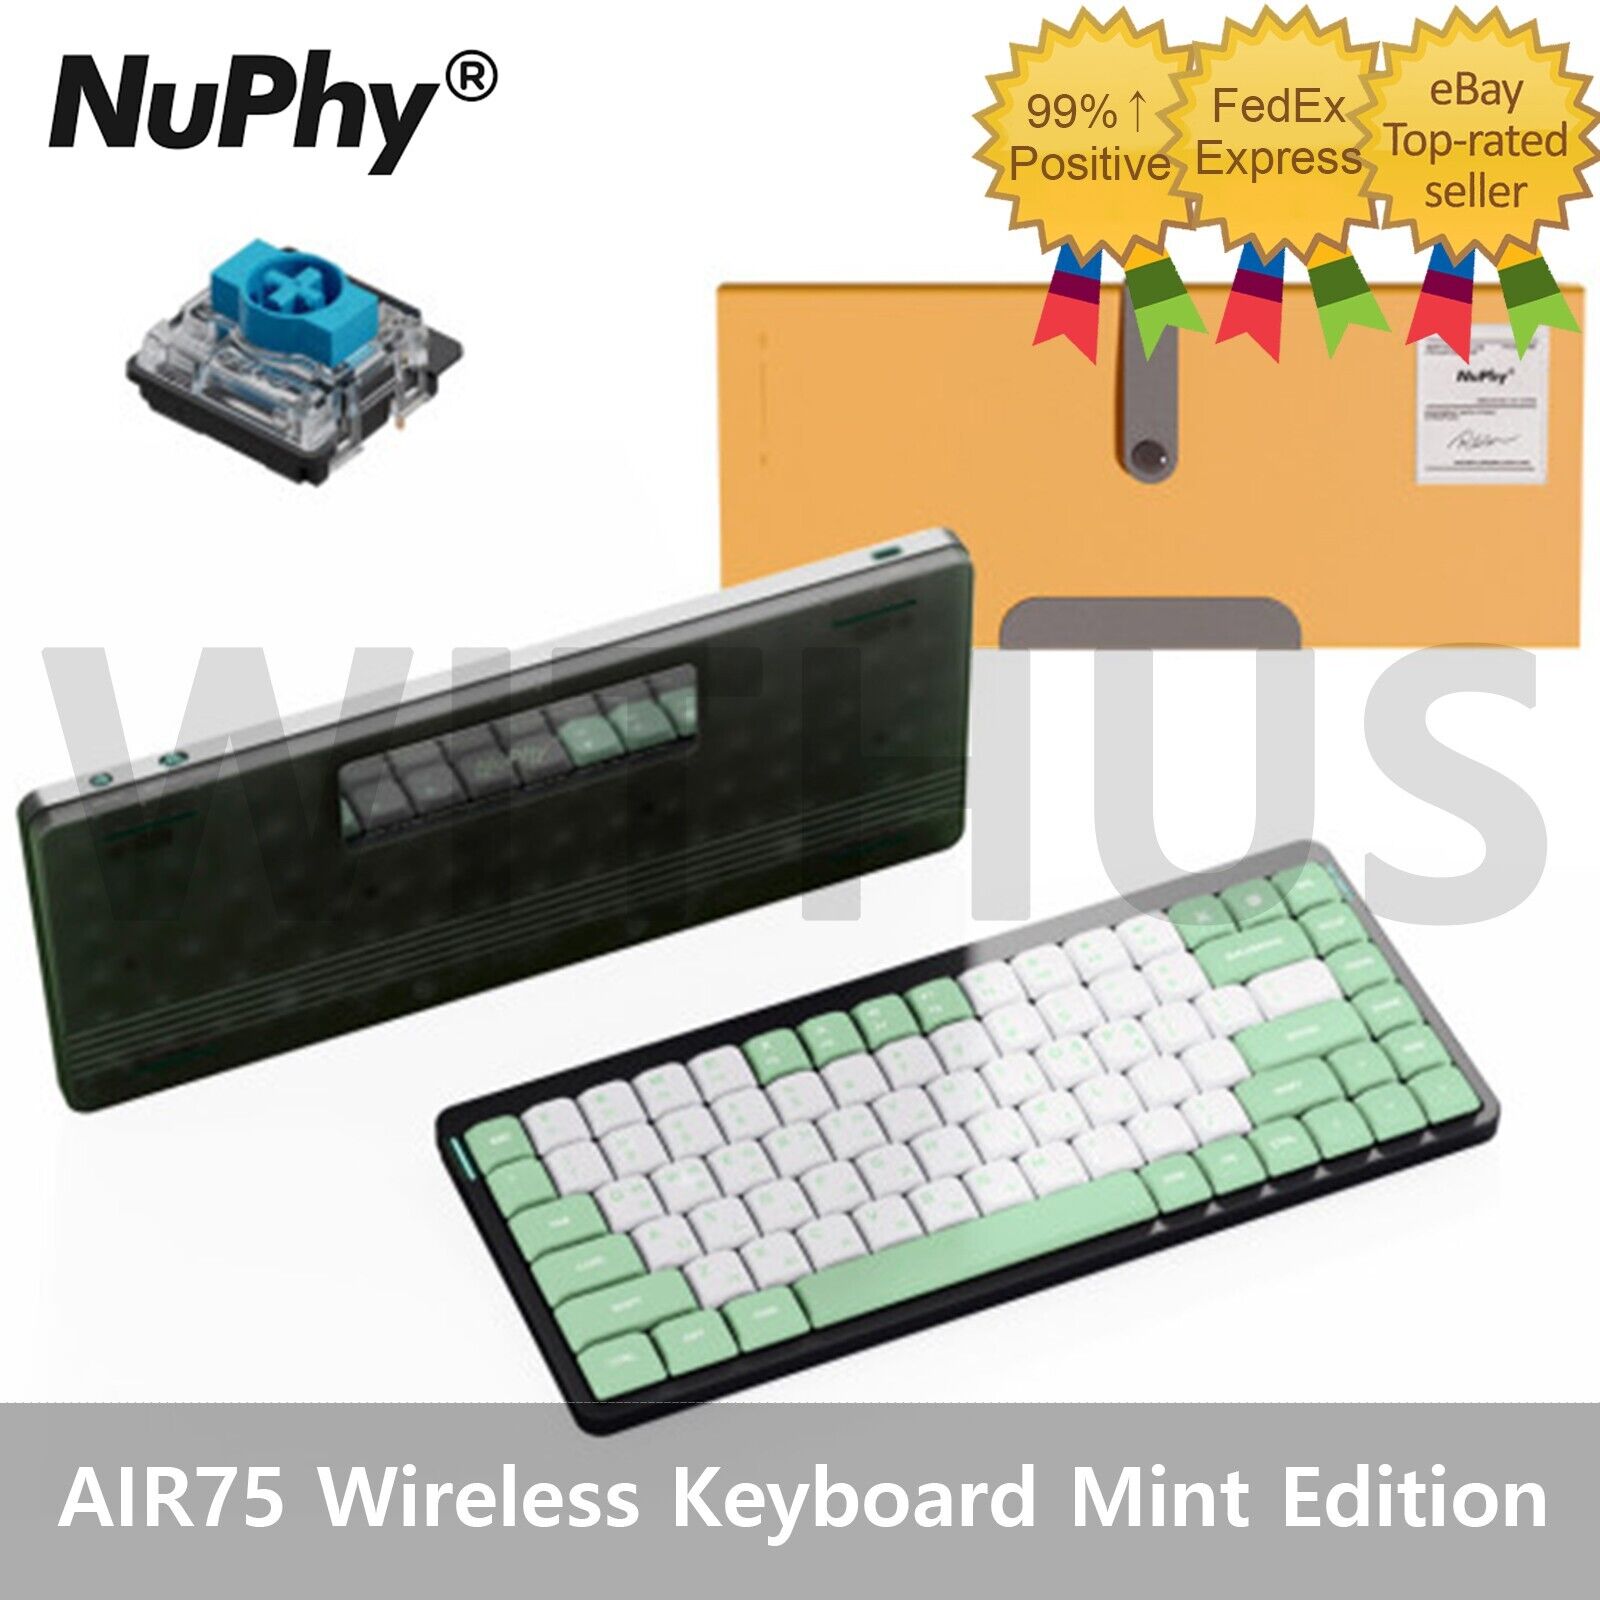 NuPhy AIR75 Wireless Mechanical Keyboard Mint Edition 2.4G (Exclusive Case)